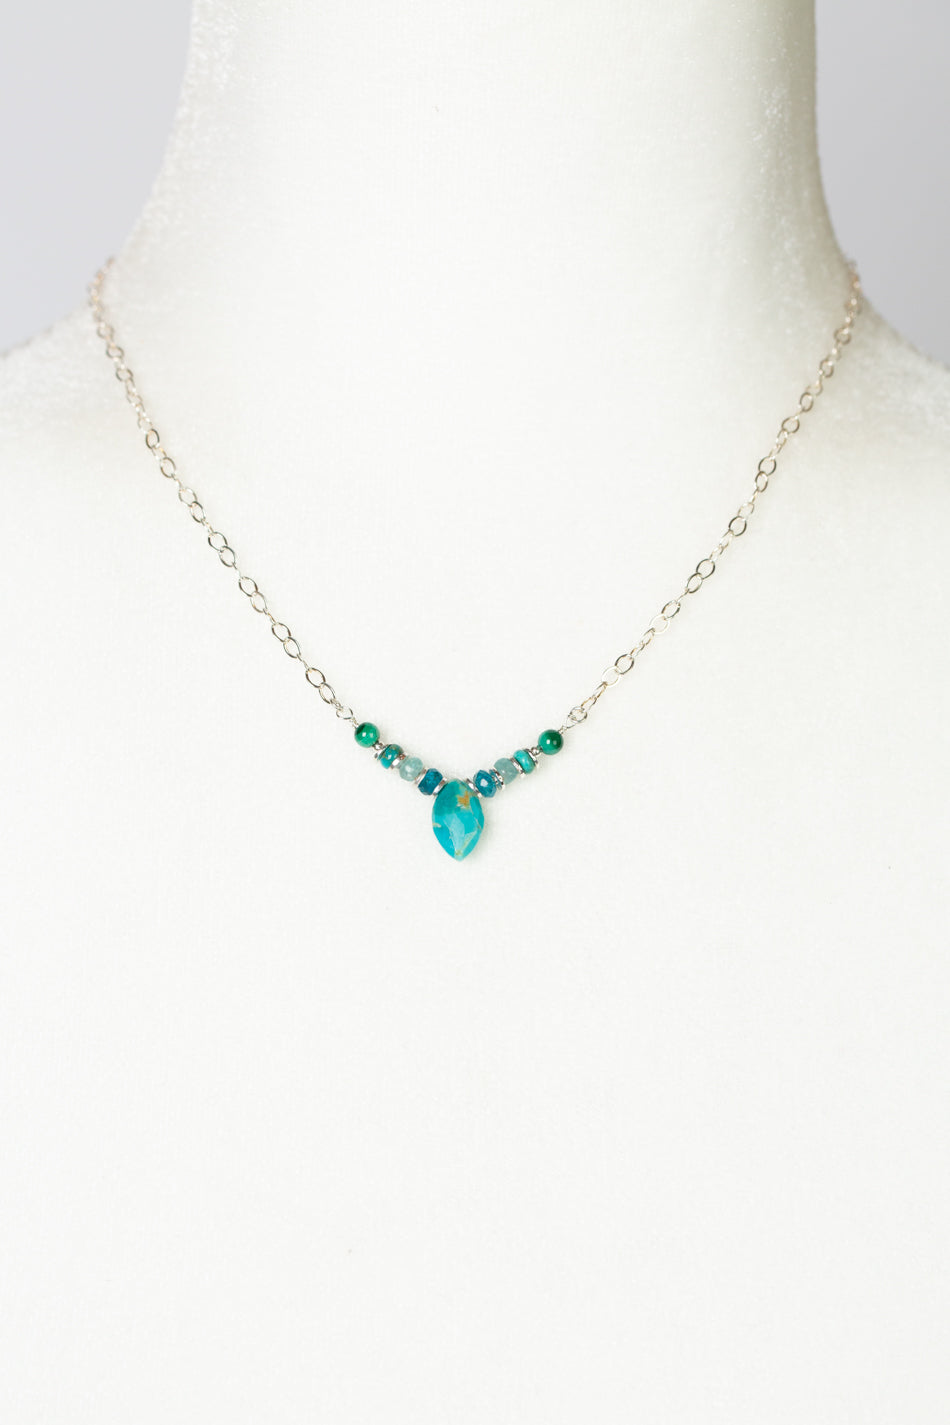 Limited 15-17" Apatite, Malachite With Turquoise Simple Necklace